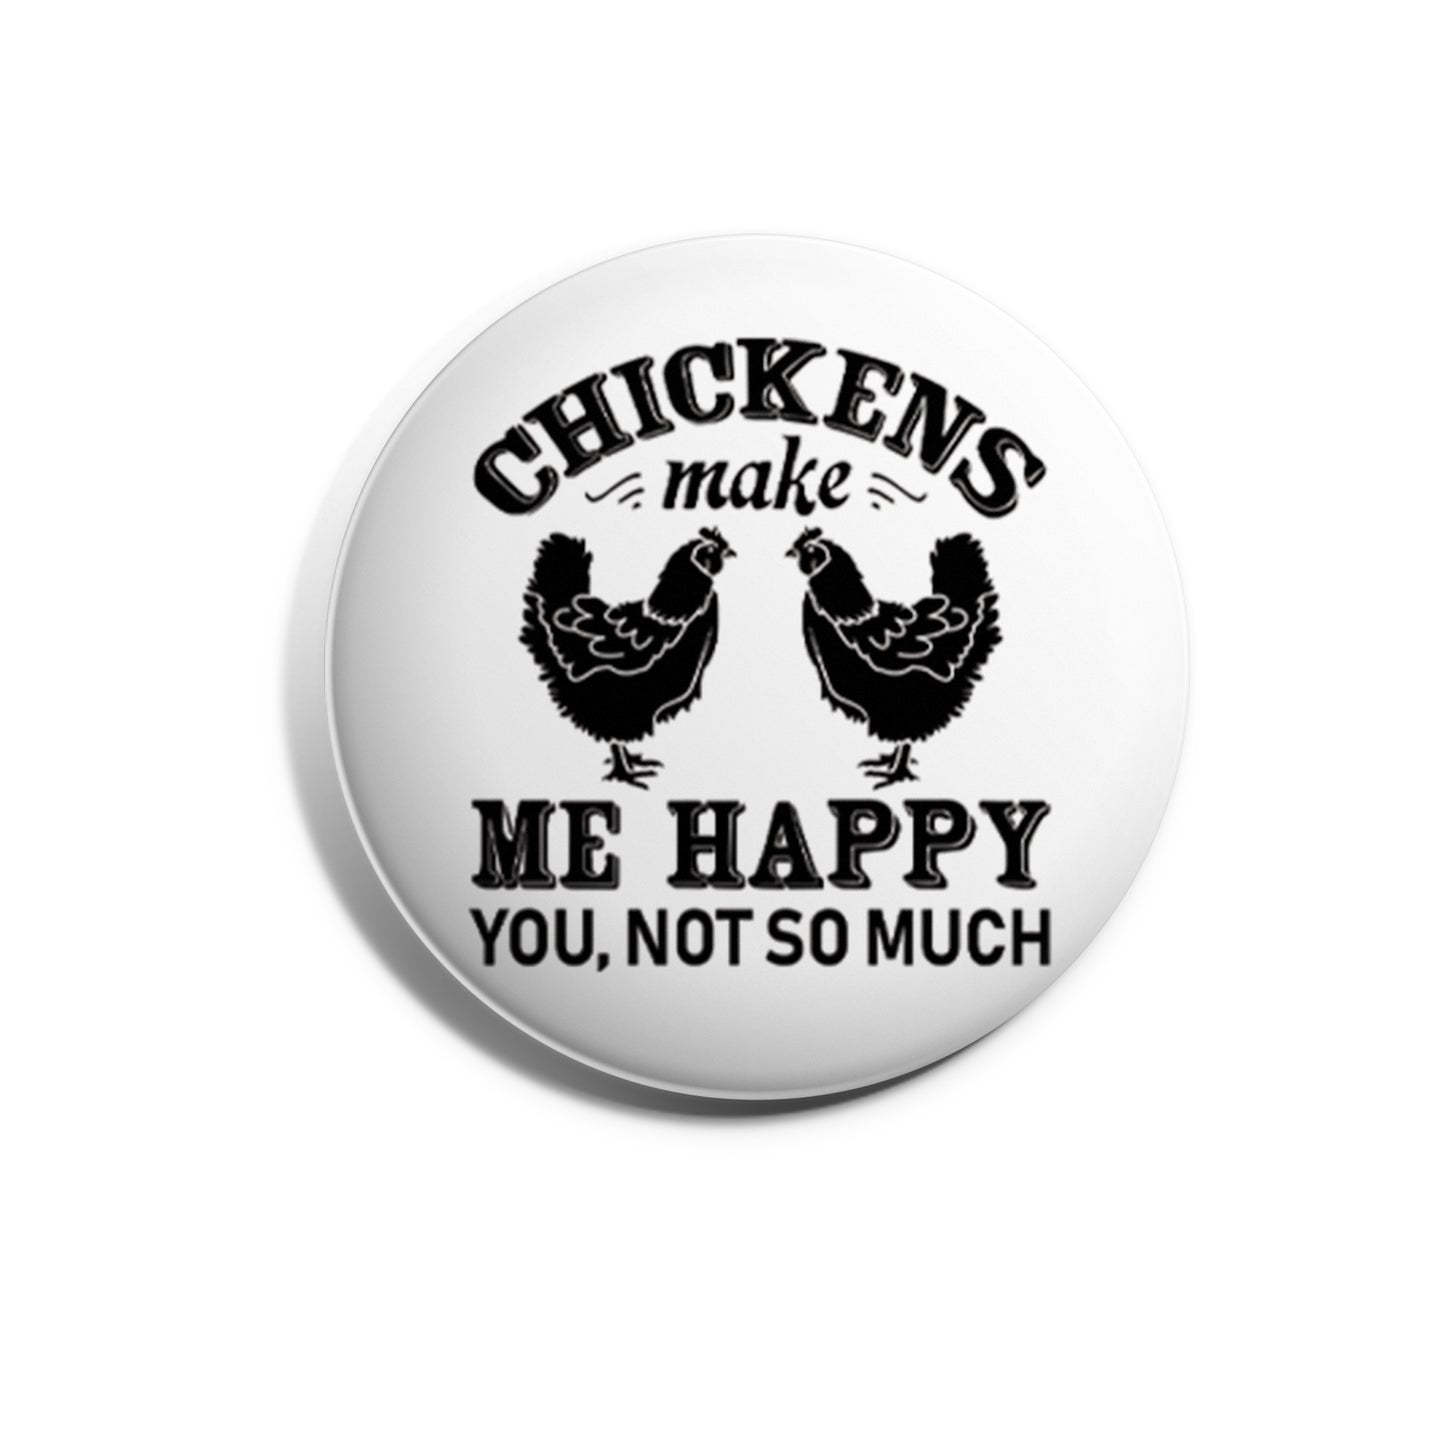 Chickens Make Me Happy. You, Not So Much.